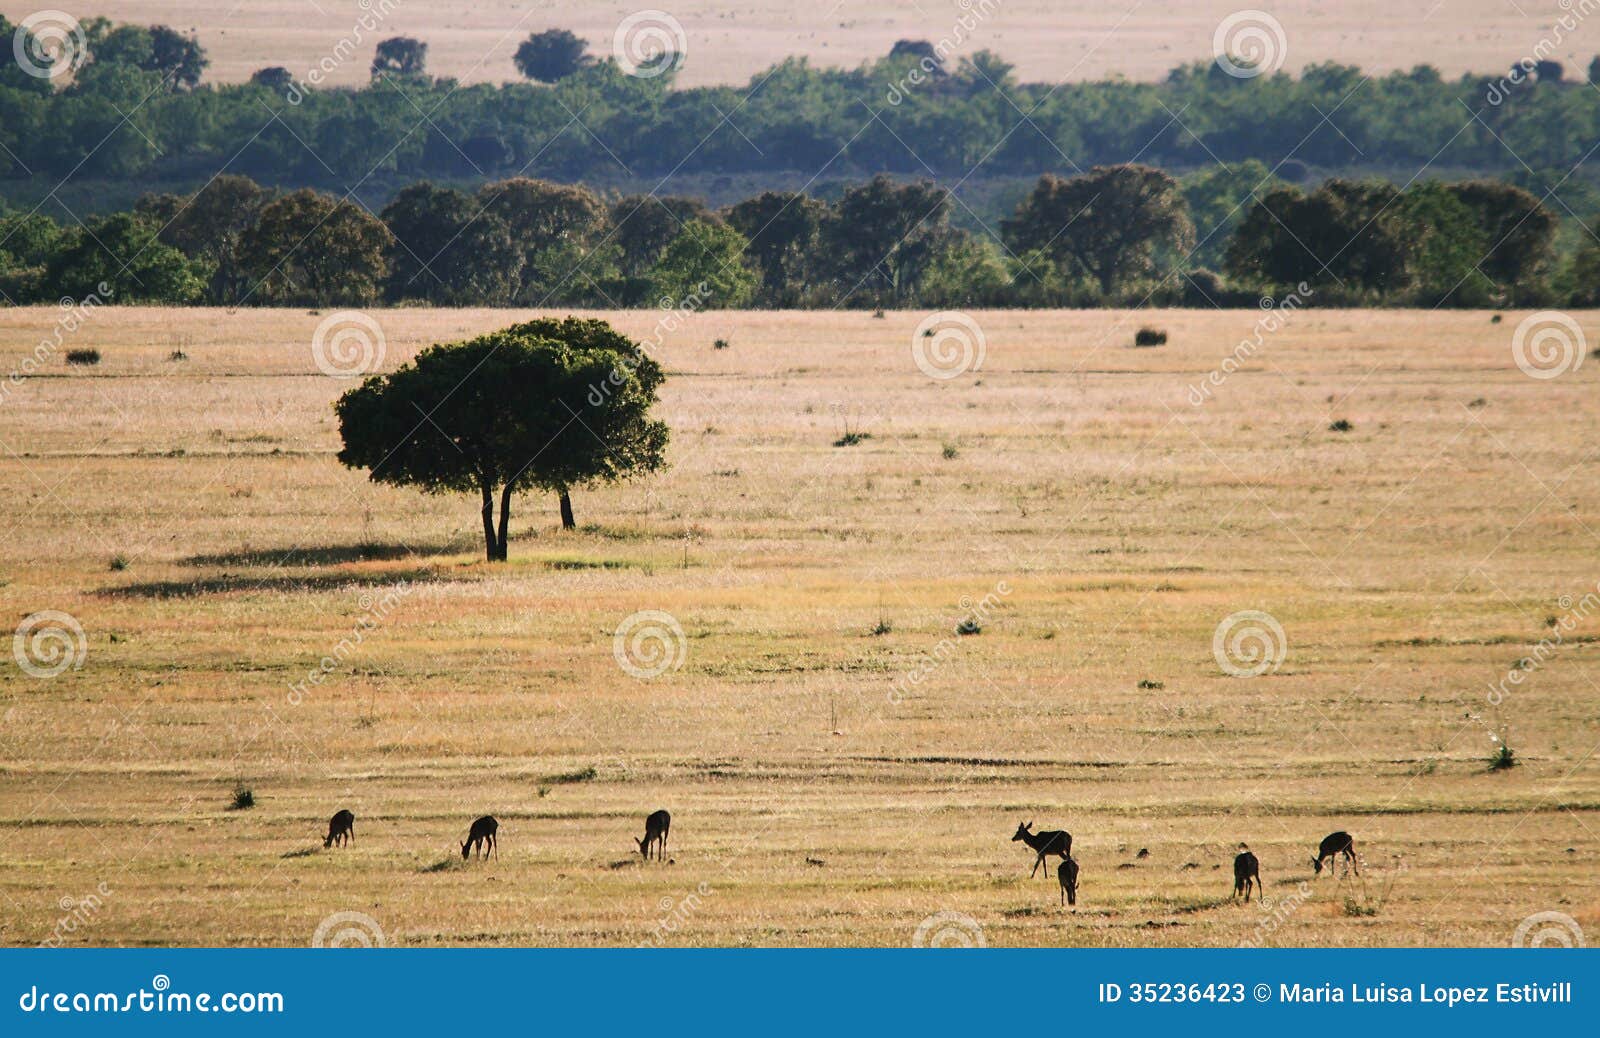 trees in the grassland in cabaÃÂ±eros